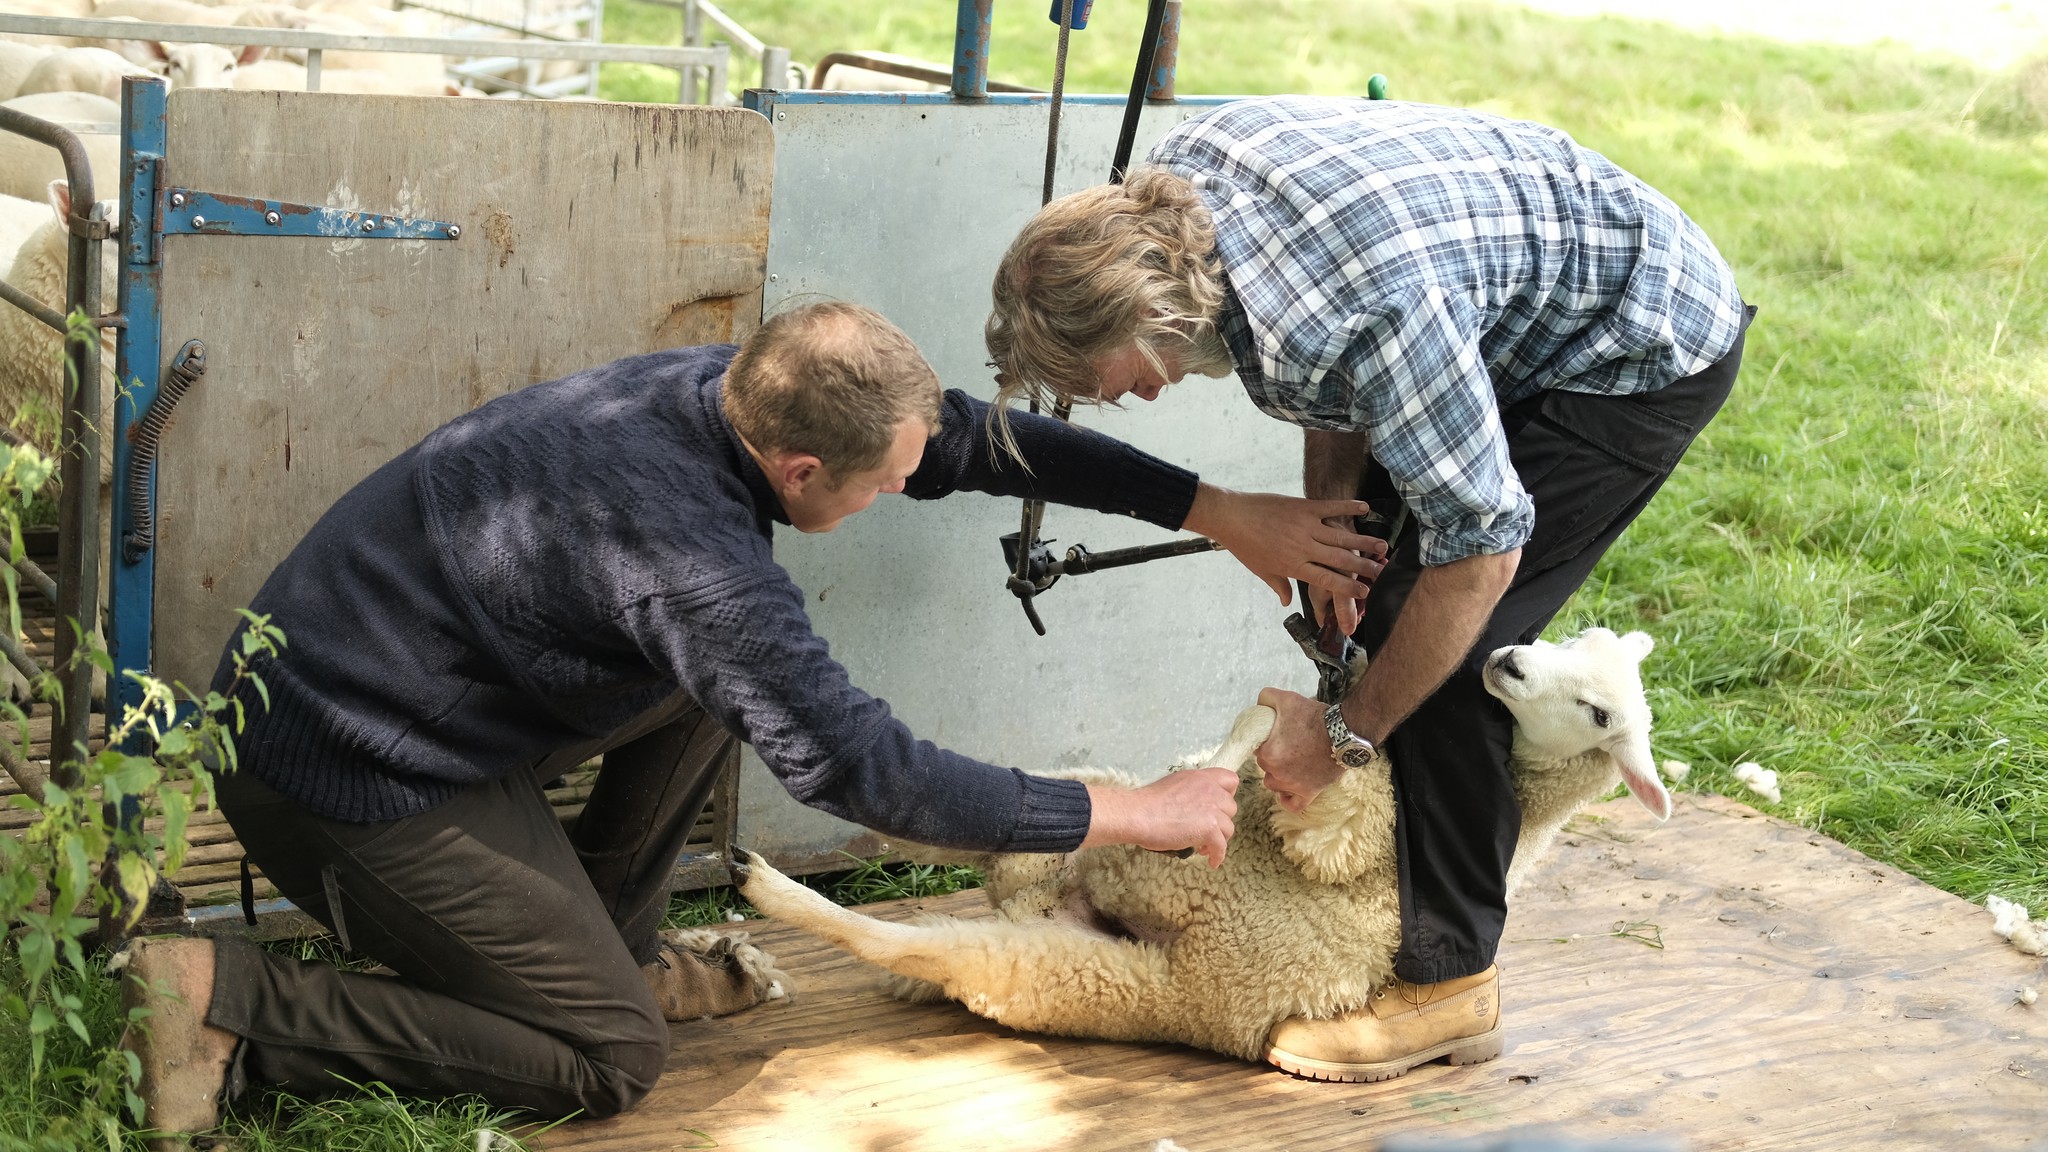 Marcus Wareing shearing a sheep with the help of a farmer on Tales From a Kitchen Garden